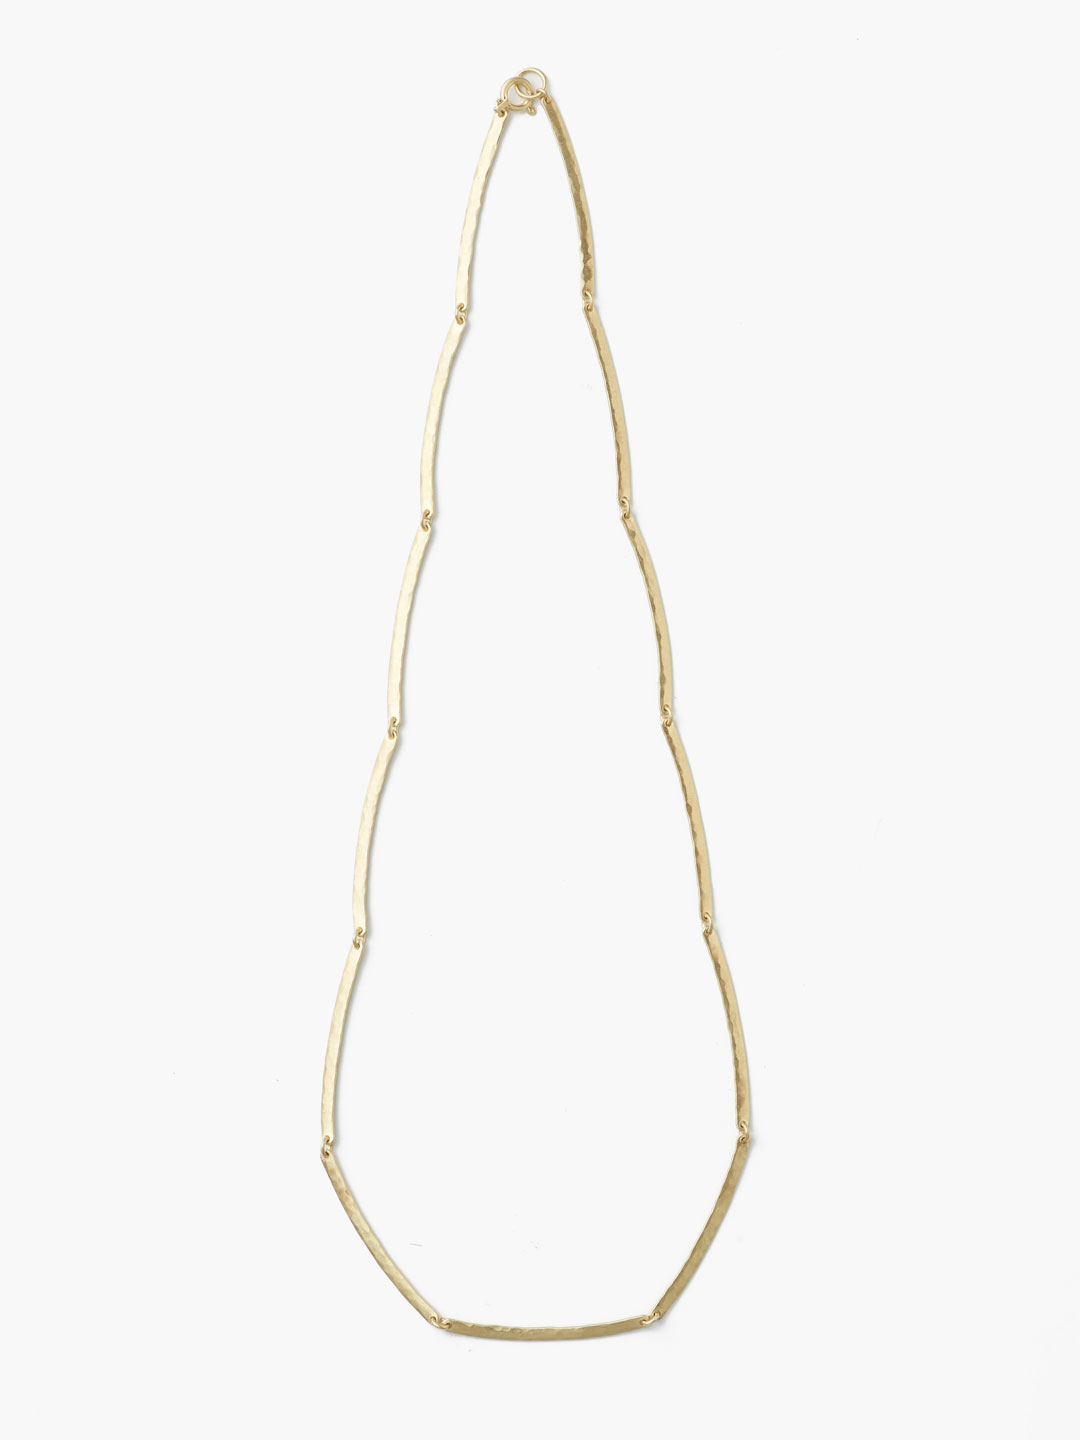 Kumo Contrail Necklace - Gold